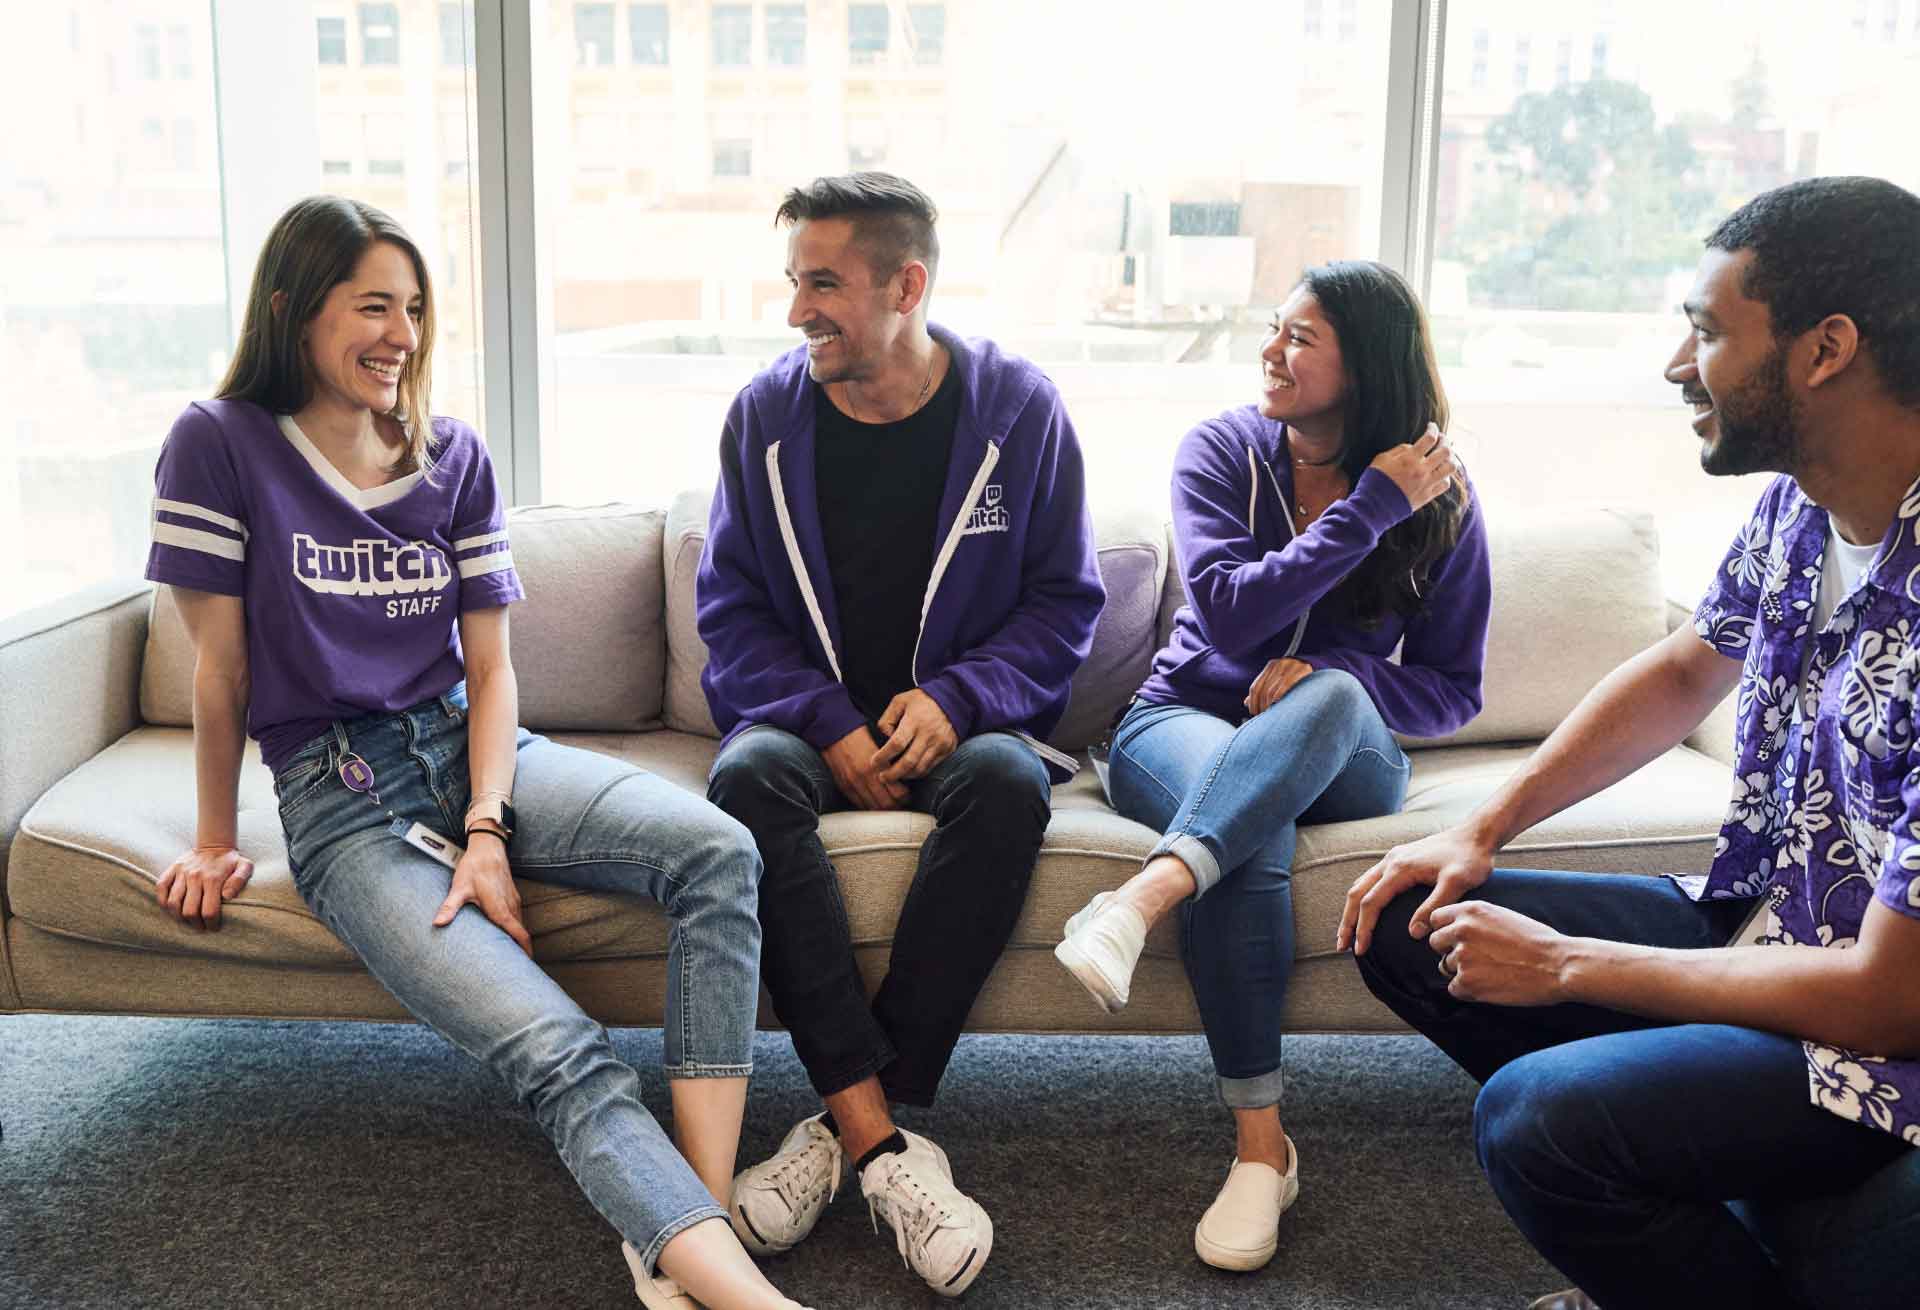 Twitch employees laughing together on a couch